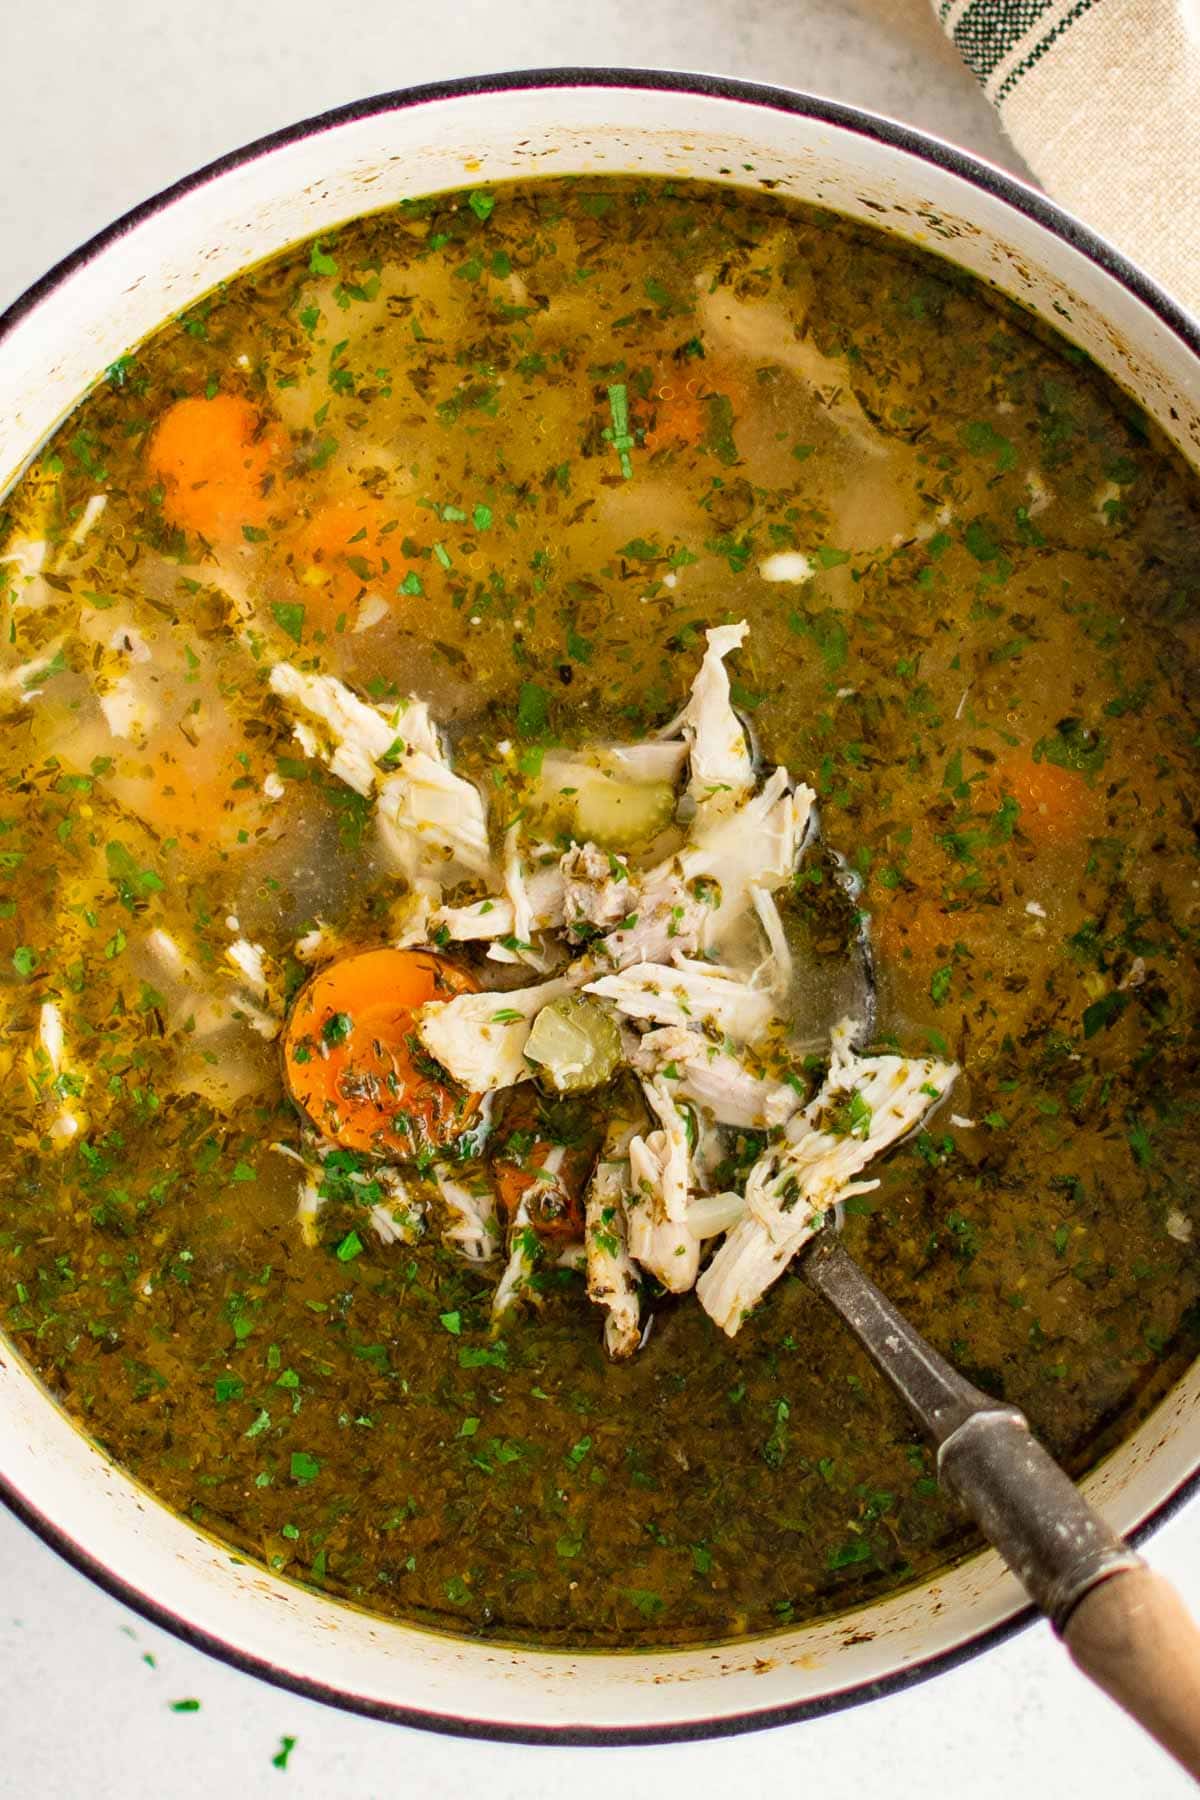 Shredded chicken, sliced carrots, herbs in chicken broth in a large soup pot, with a ladle.